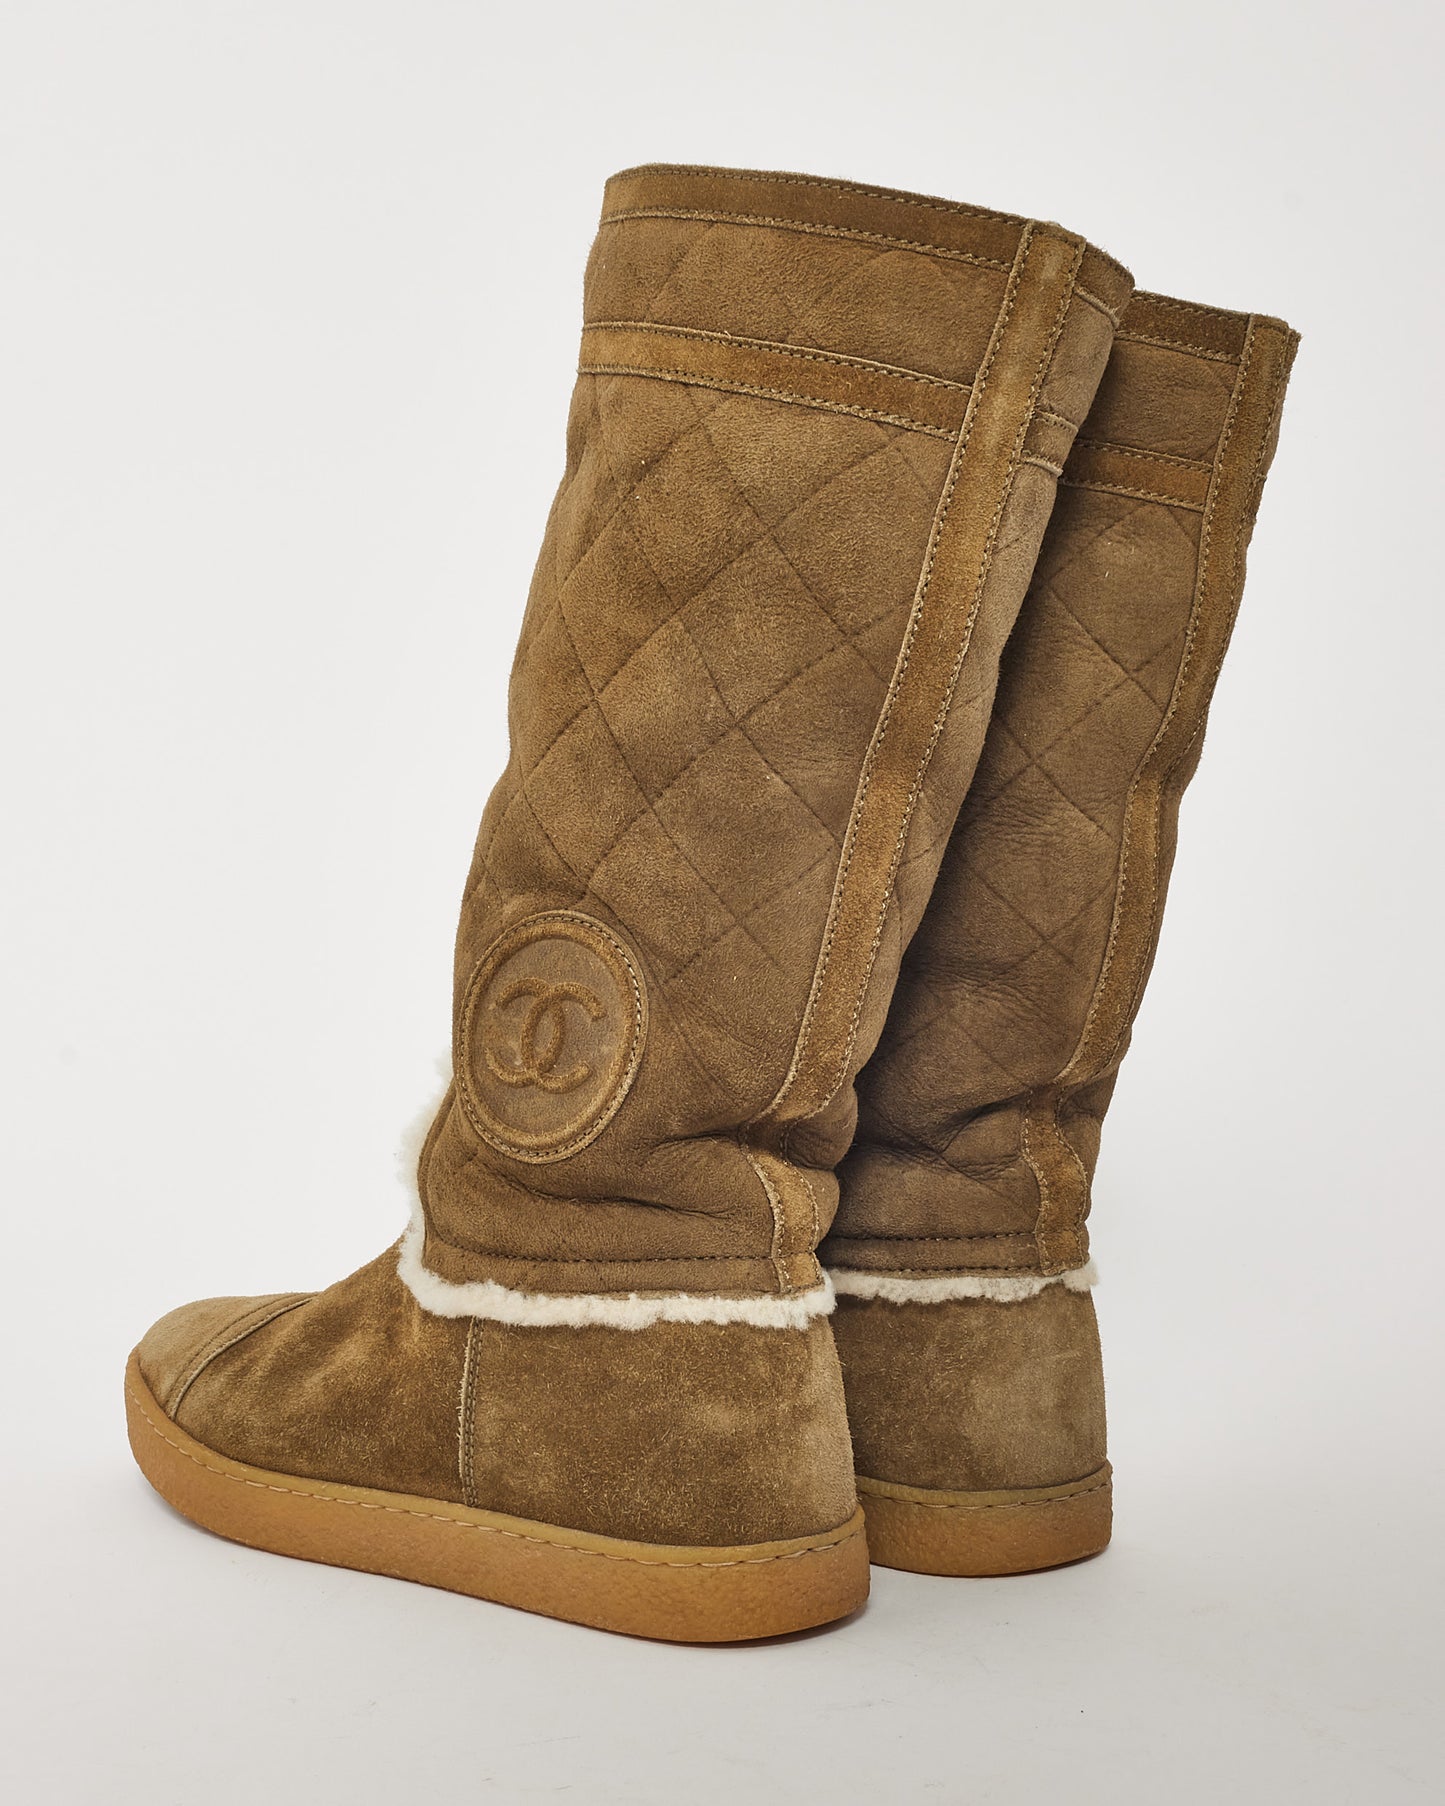 Chanel Green Suede Shearling Interior Boots - 37